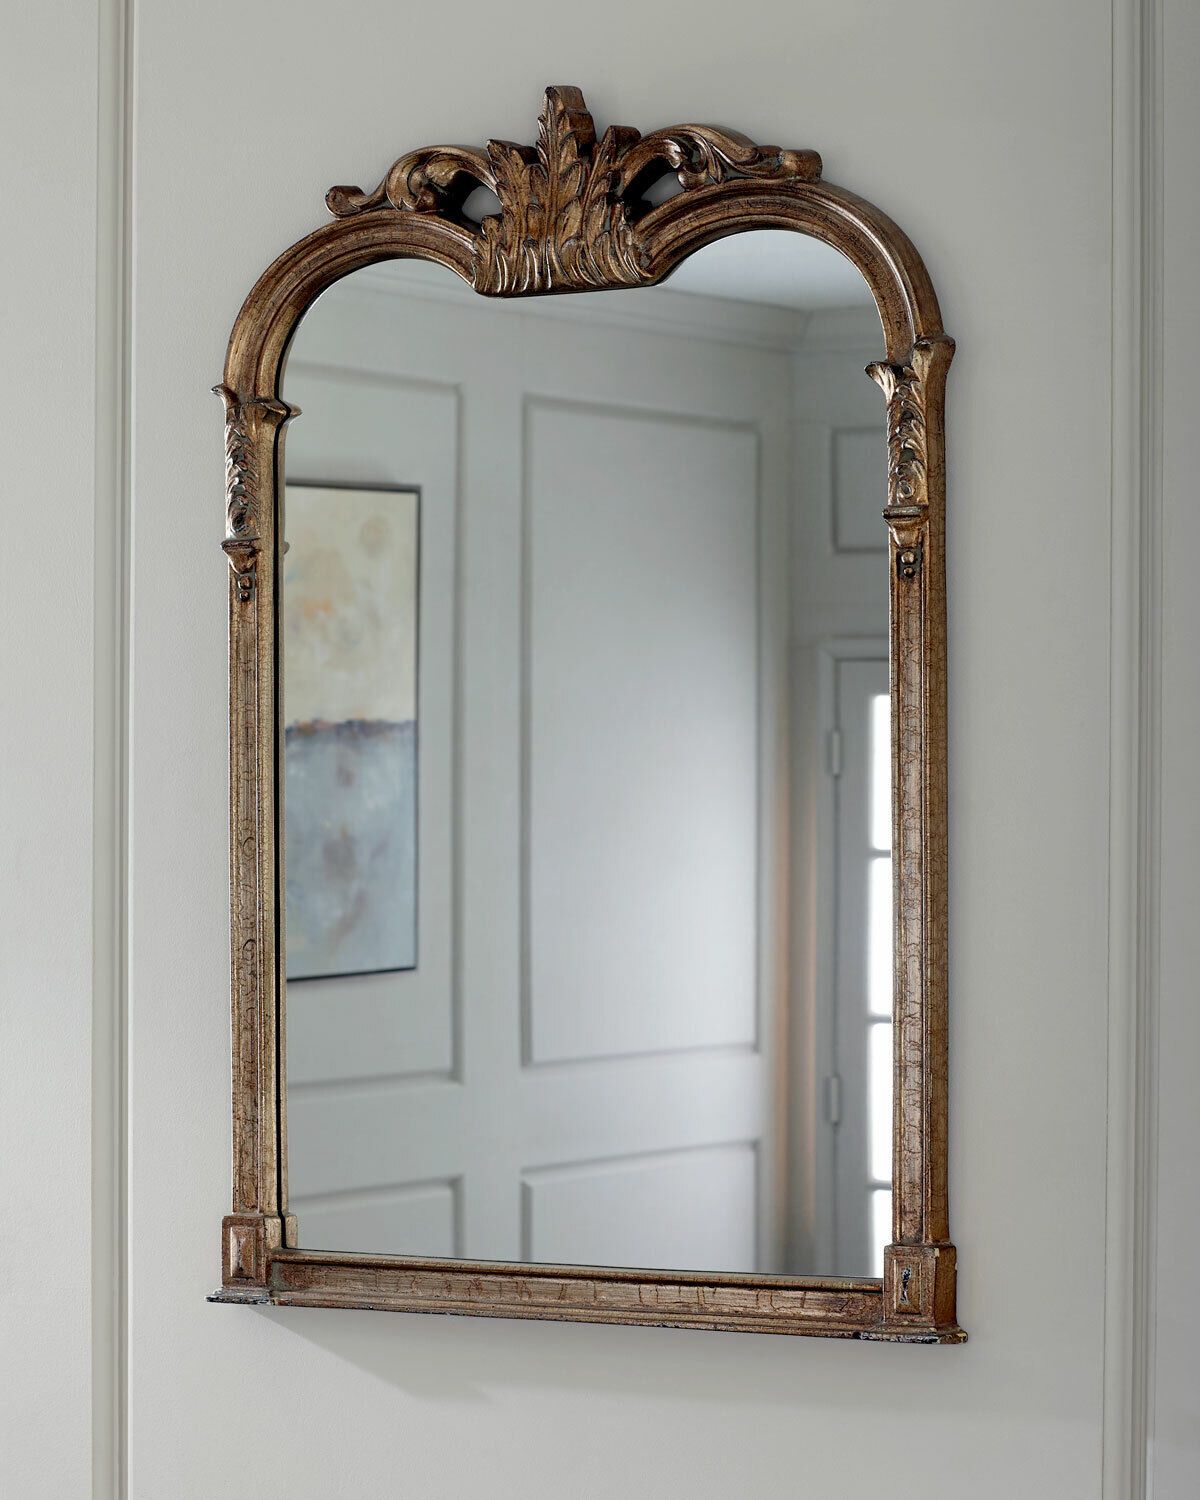 French Ornate Arched Wall Mirror Farmhouse Chic Vanity Mantle Bath Horchow 43"H | eBay US